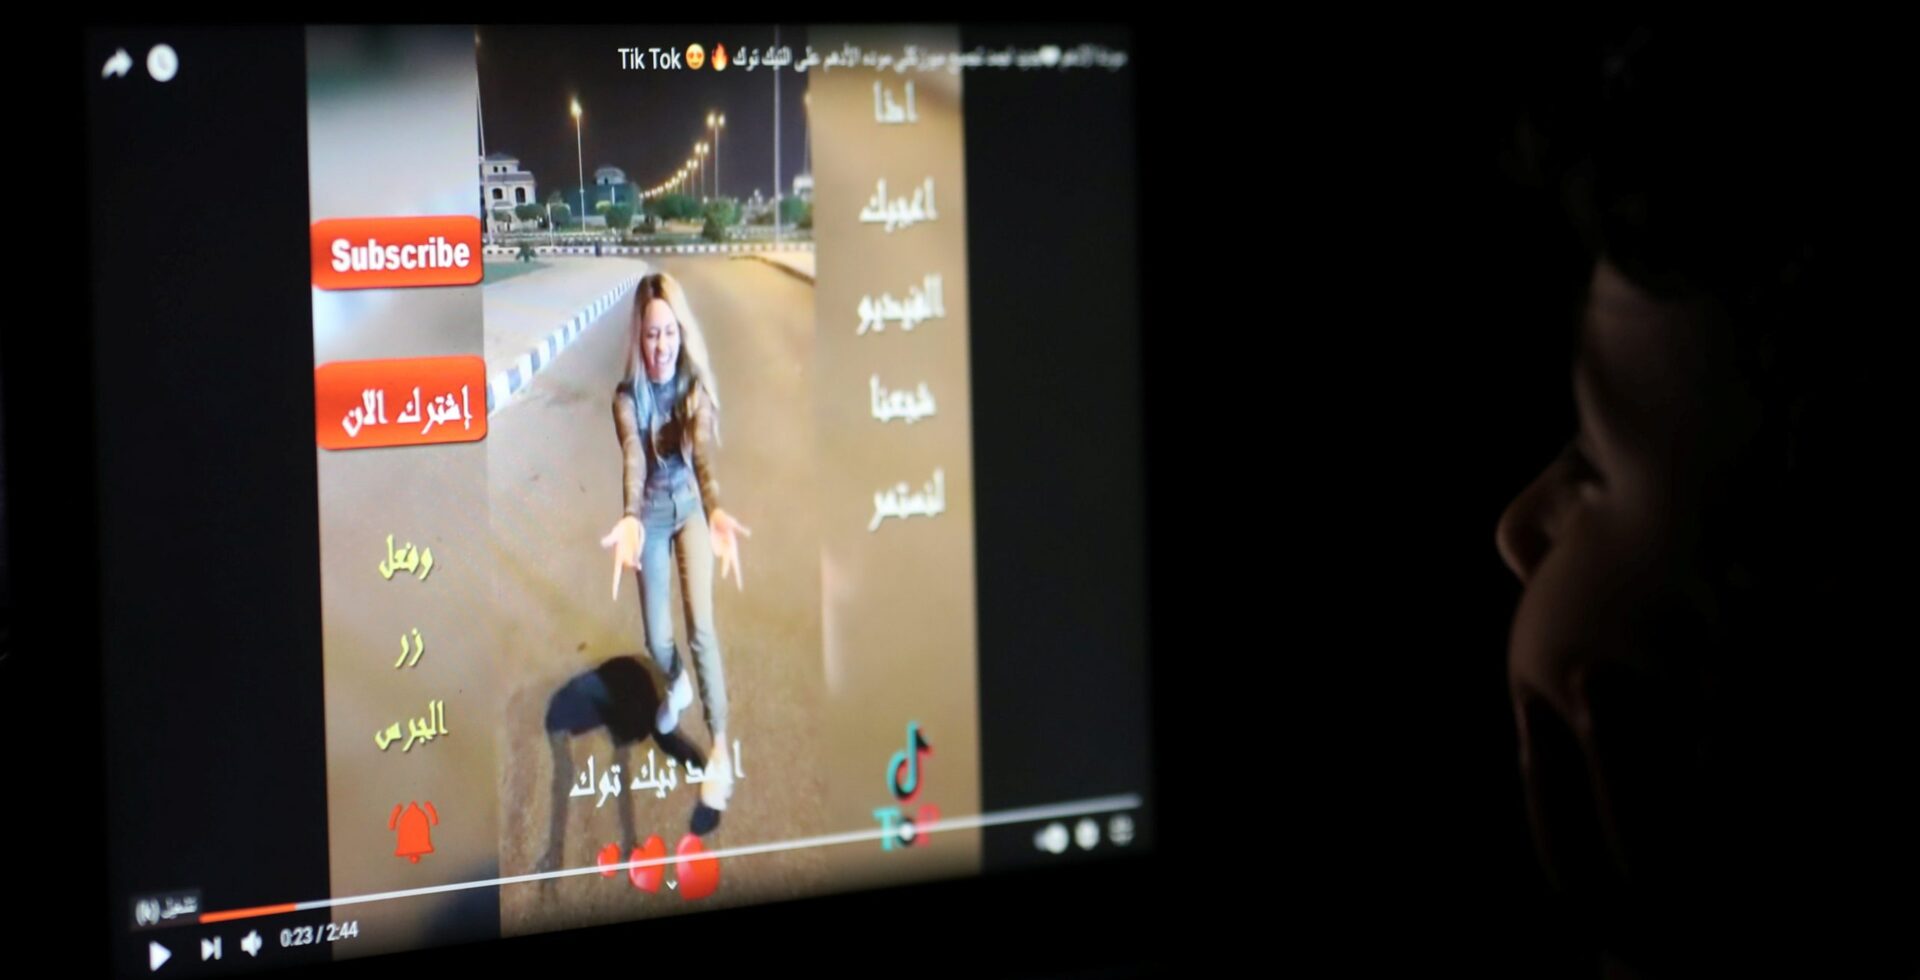 A child watches a tiktok video on YouTube in Egypt